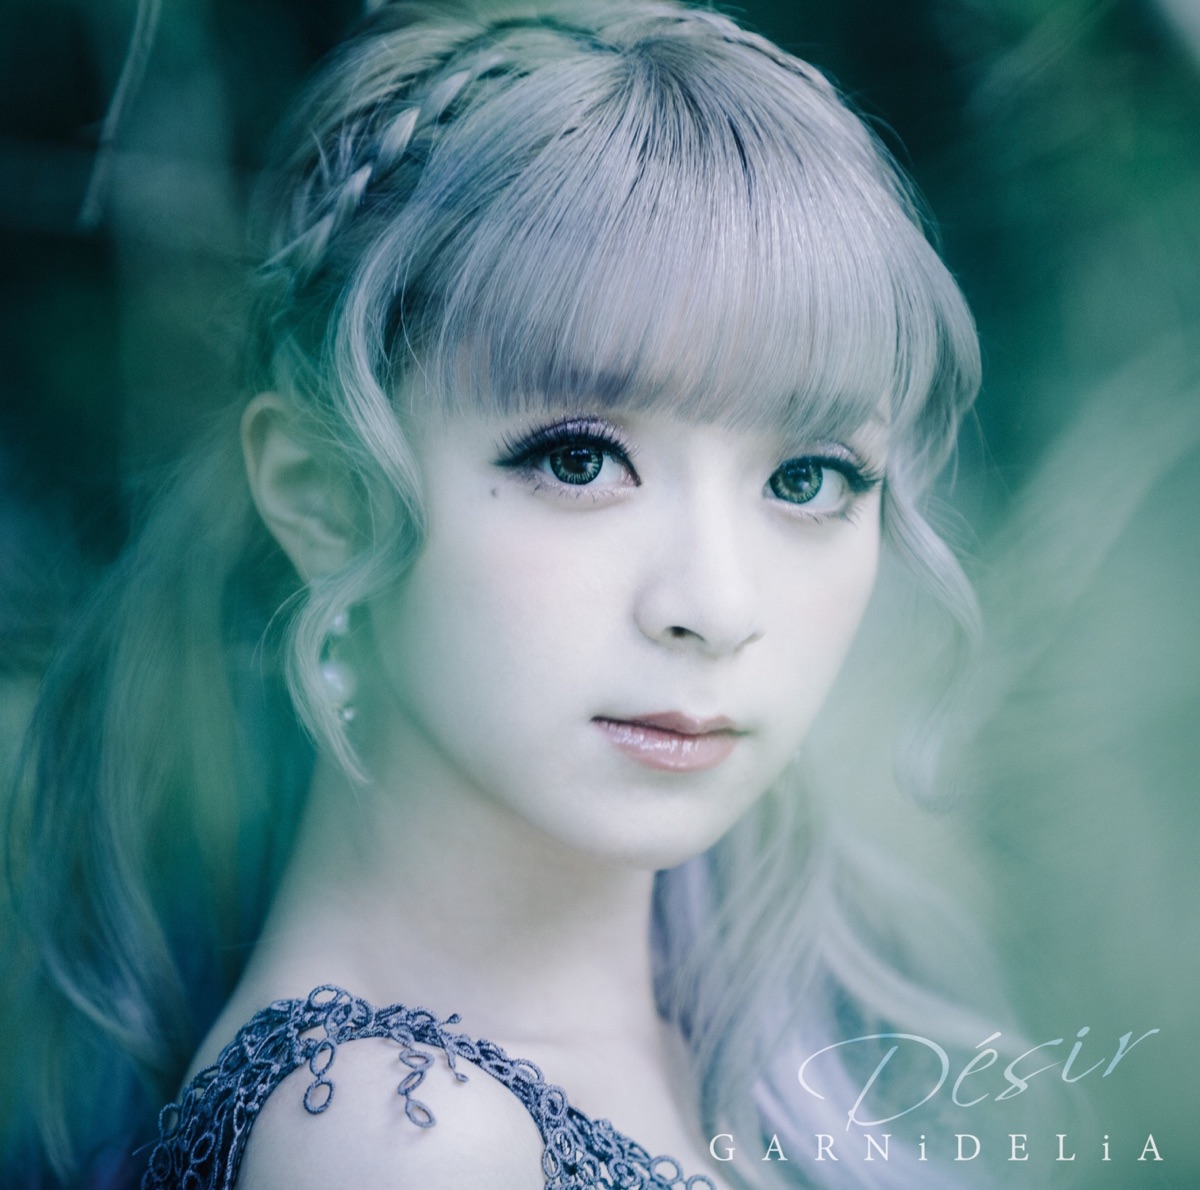 Cover art for『GARNiDELiA - Désir』from the release『Désir』